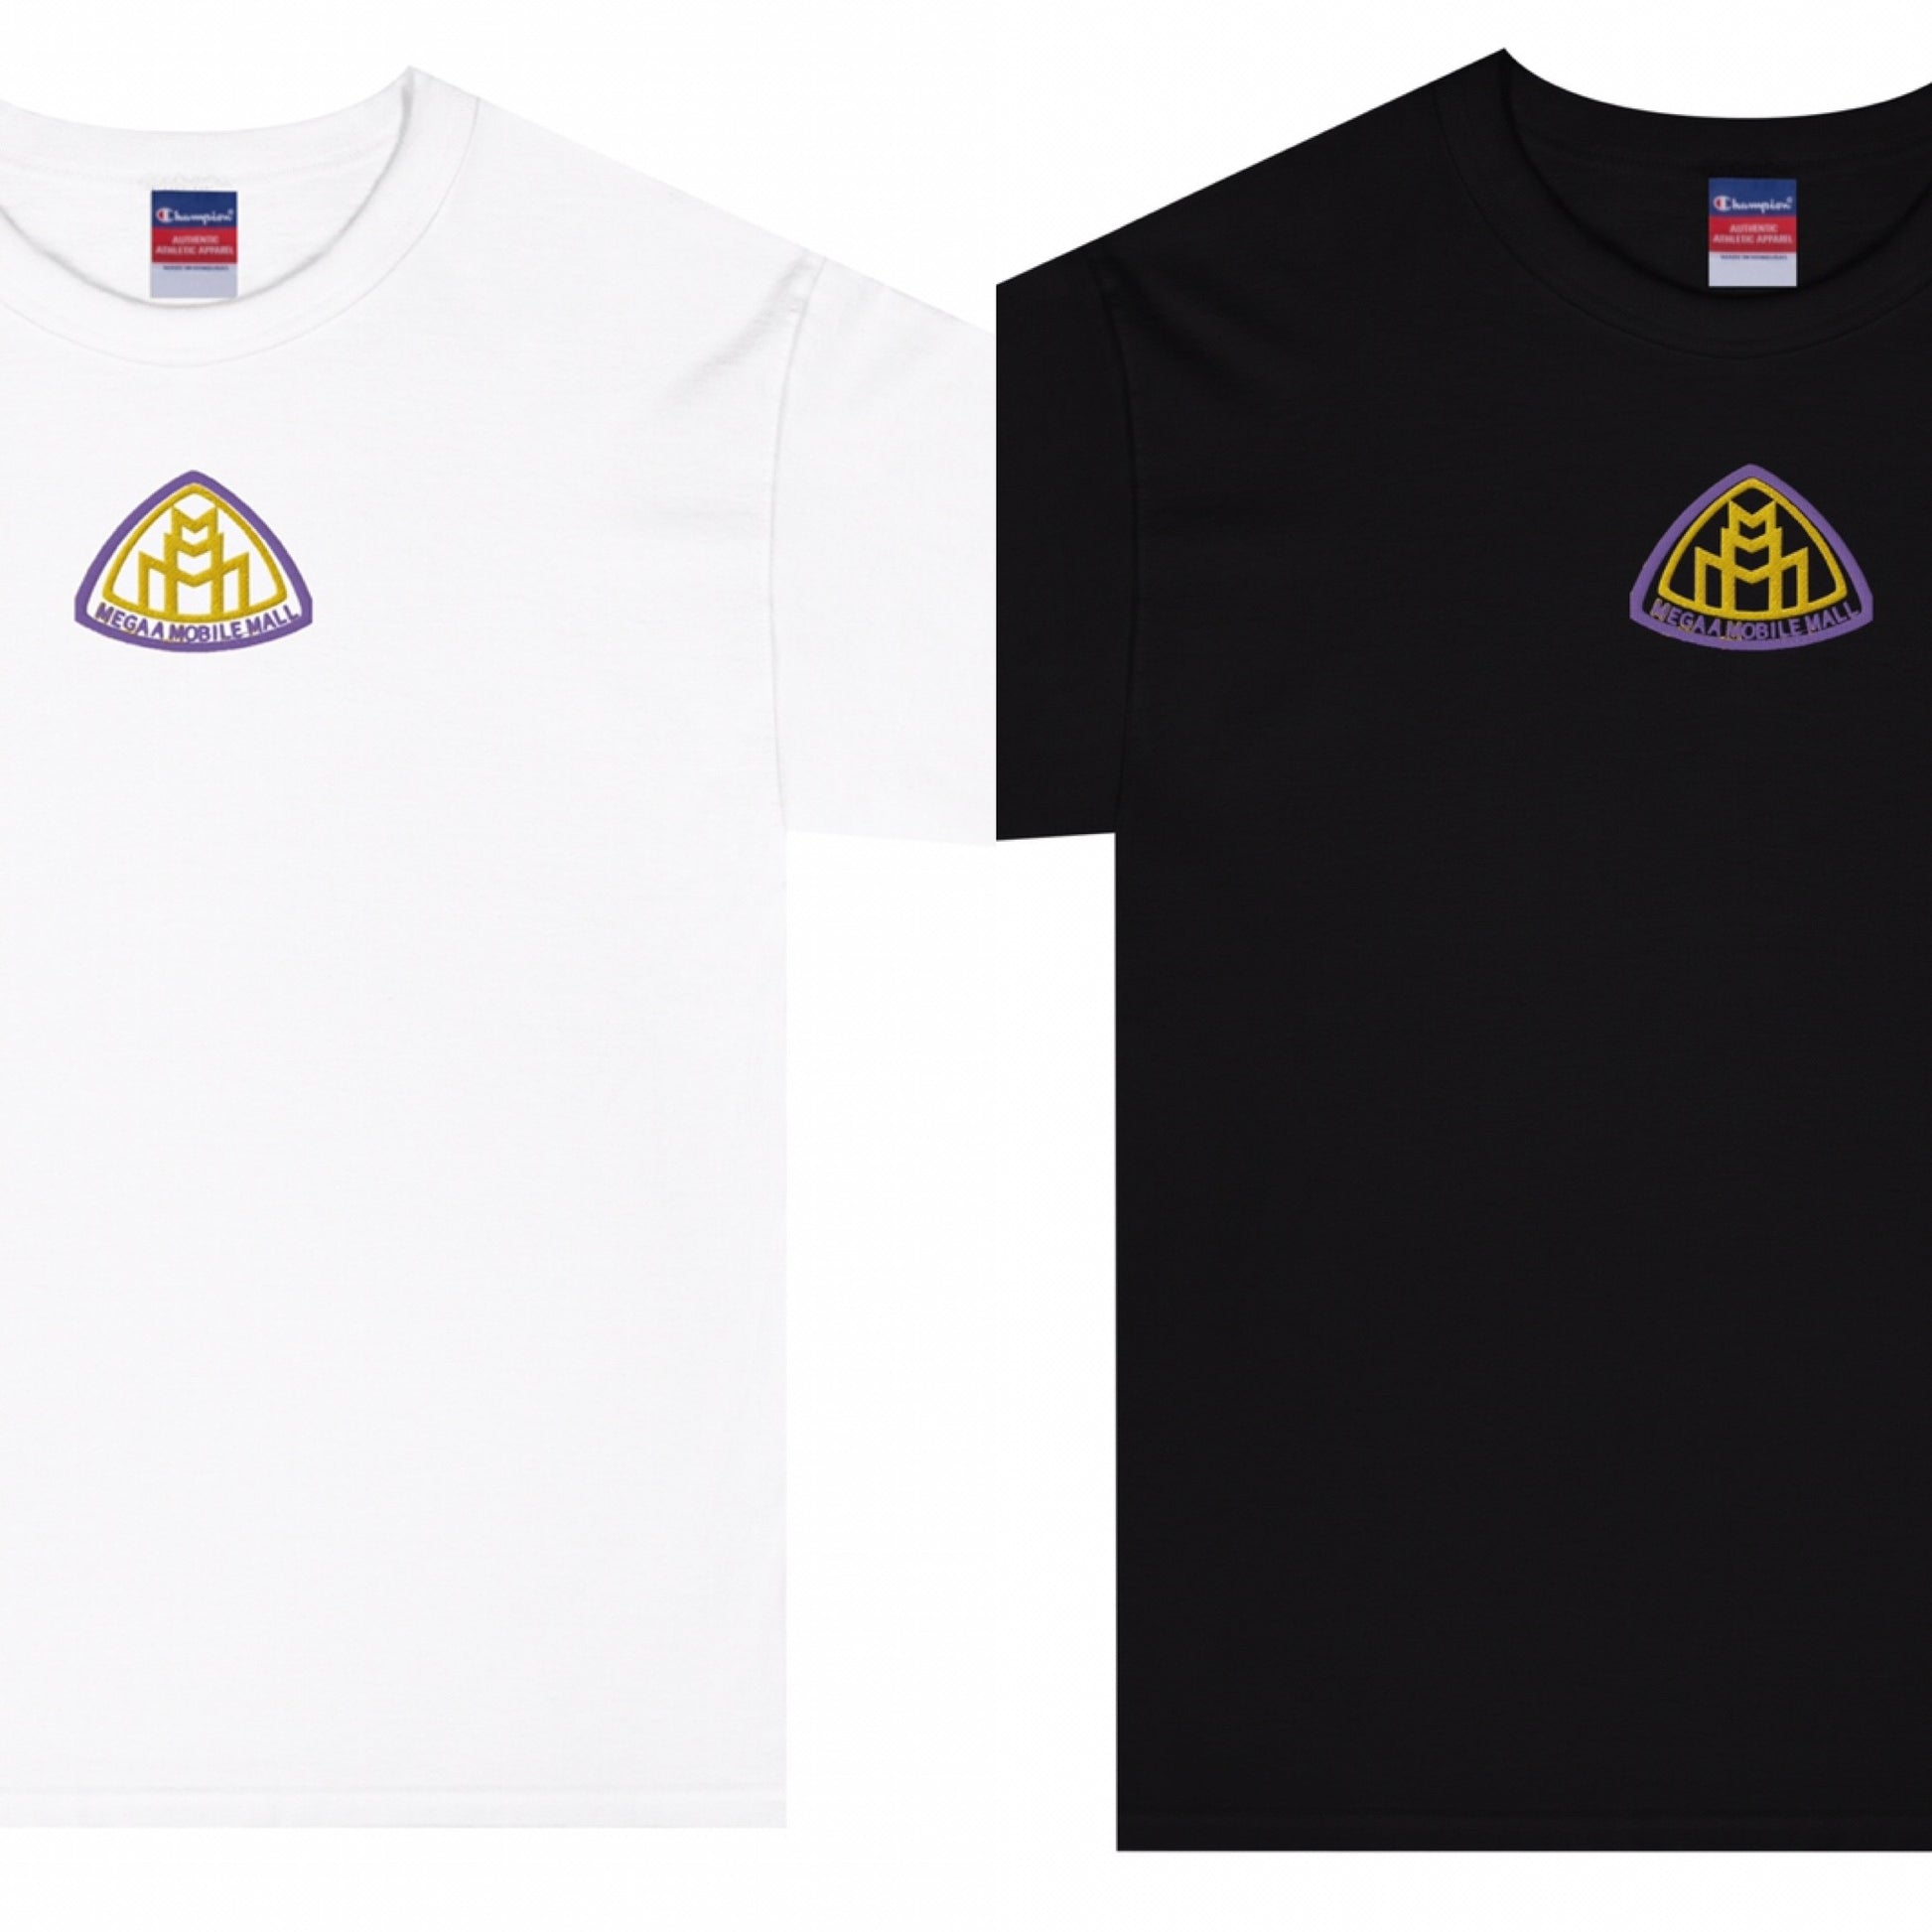 megaamobilemall logo embroidery in black on white & black shirt. yellow & gold stitching. champion brand shirt